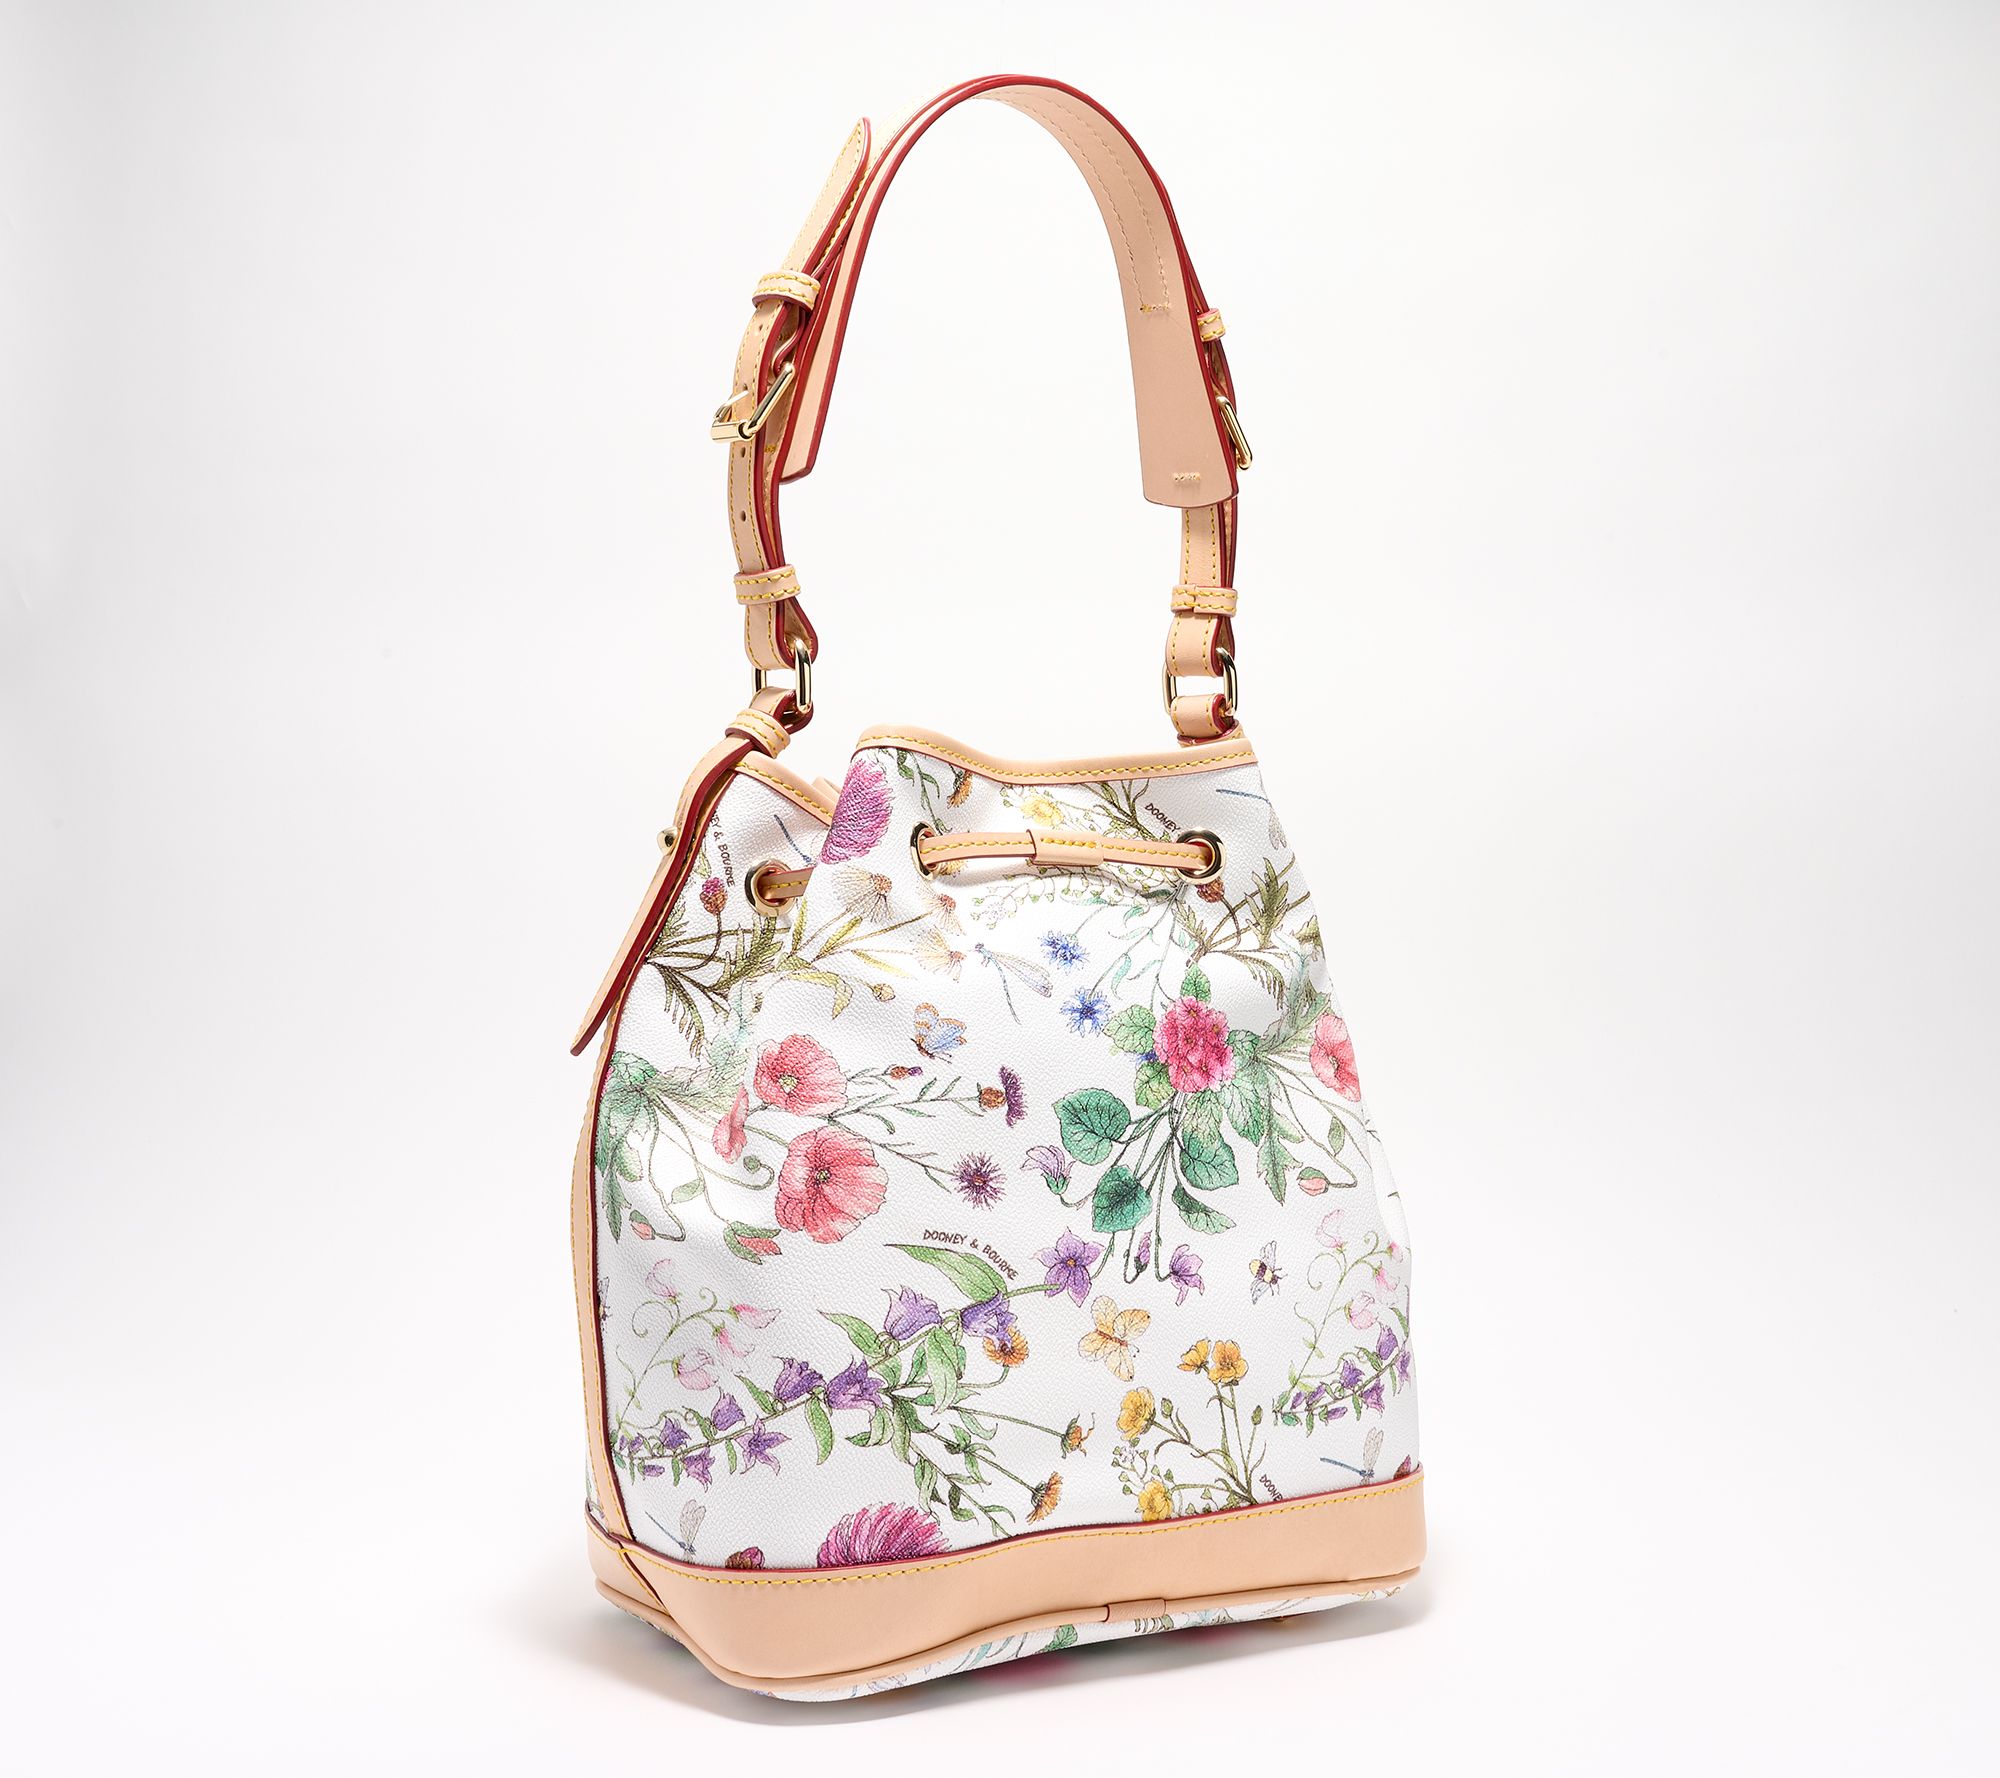 10 top-rated Dooney and Bourke purses to buy at QVC - Reviewed